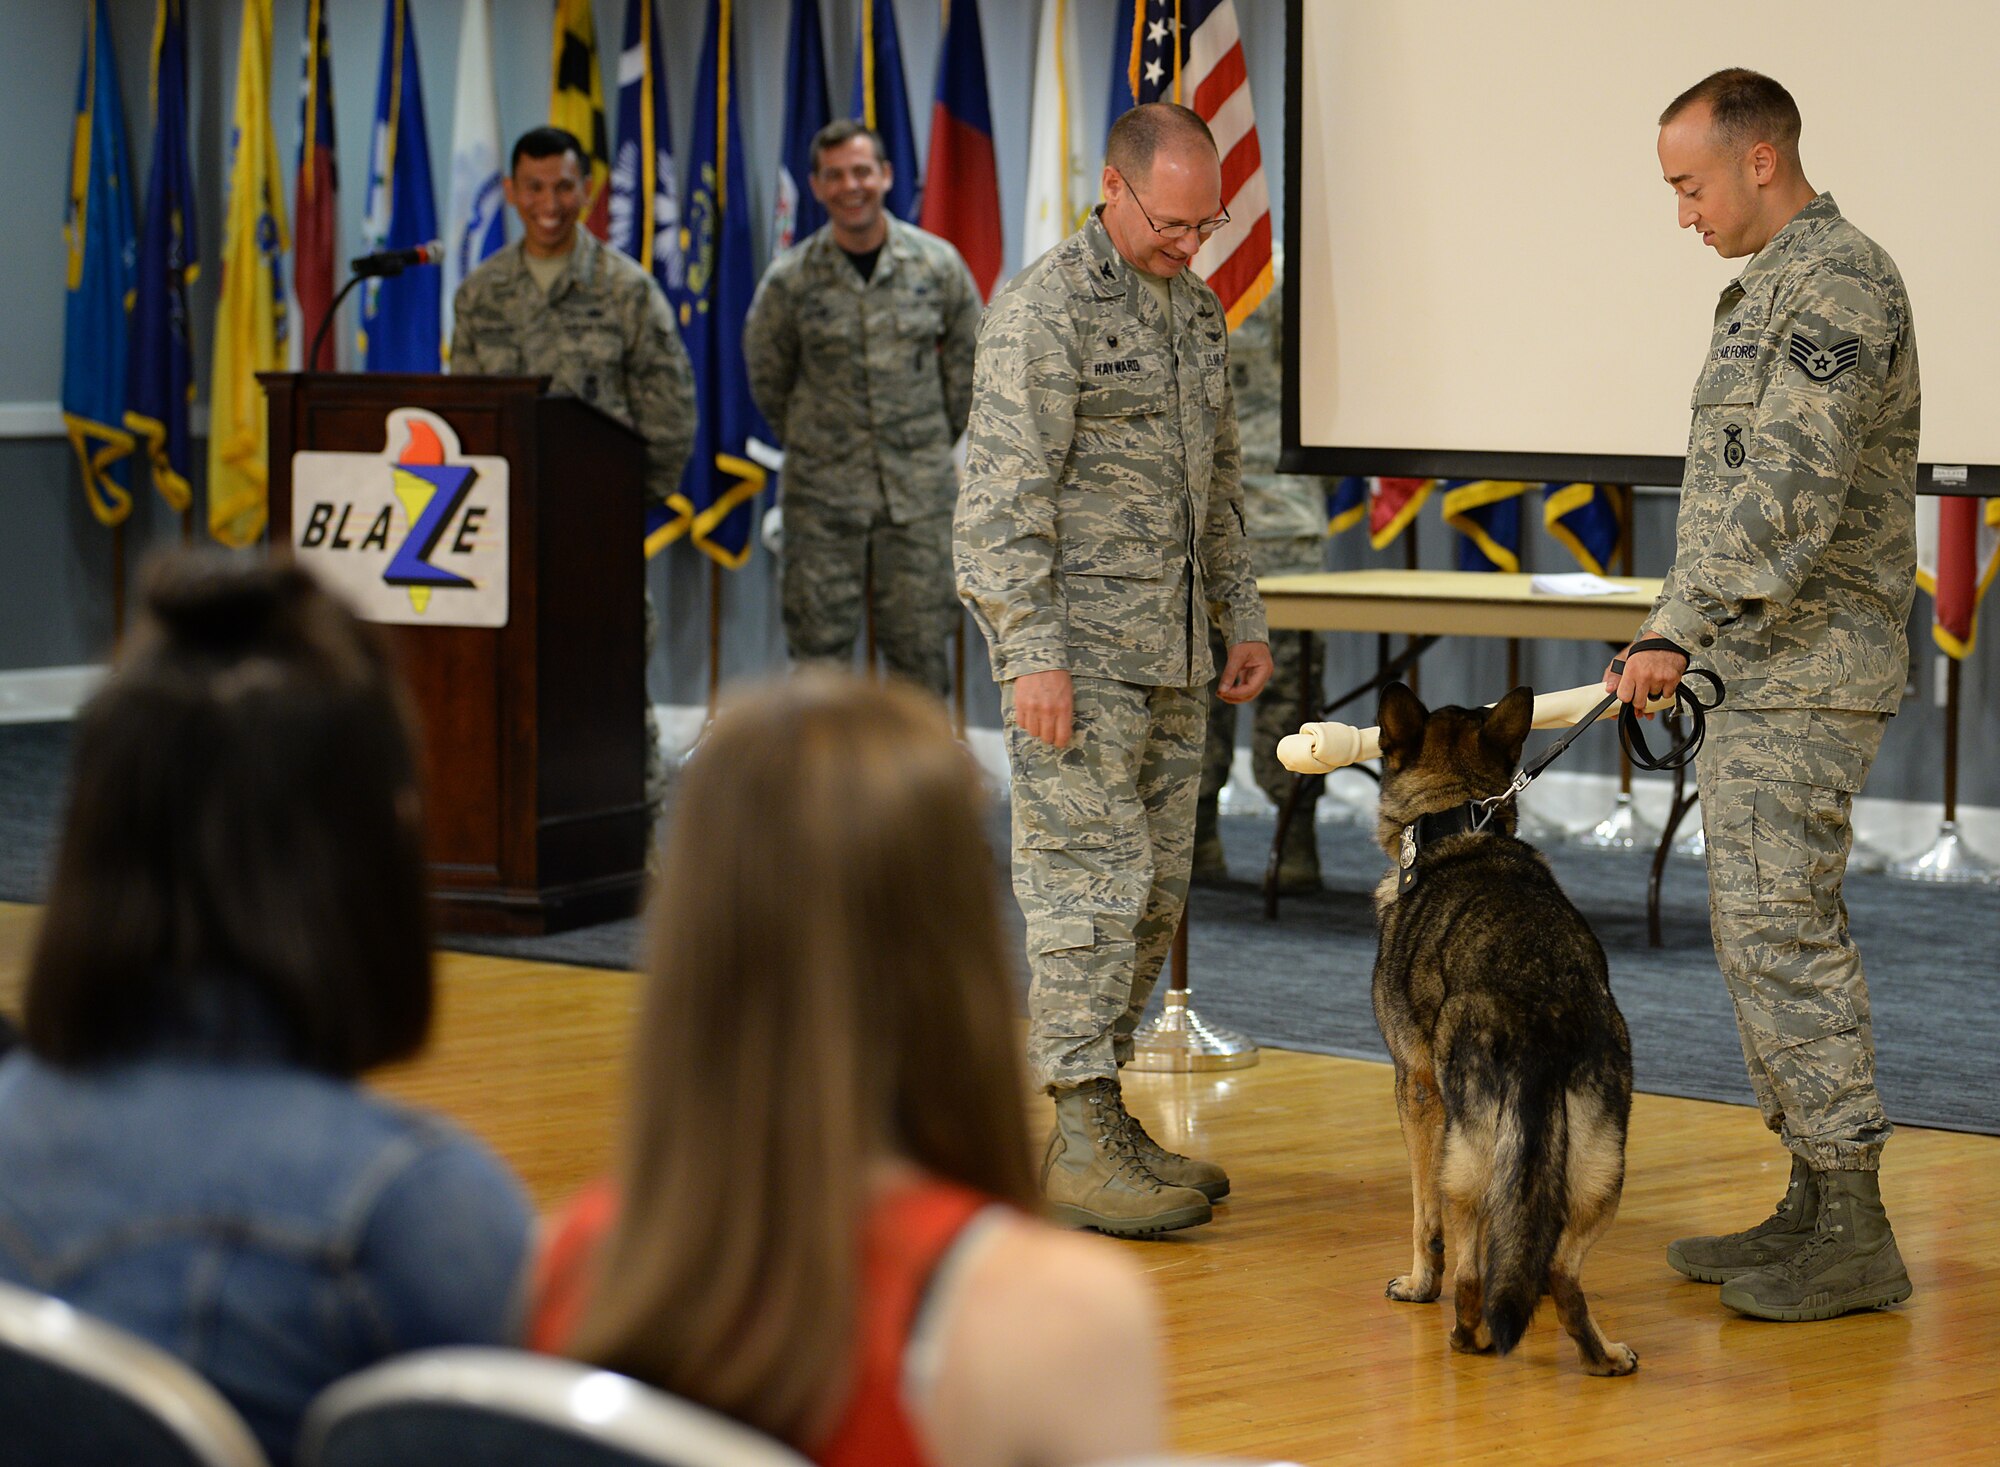 Col. Gary Hayward, 14th Mission Support Group commander, presents Military Working Dog Cherry, 14th Security Forces Squadron, a gift during her retirement ceremony Aug. 24, 2018, on Columbus Air Force Base, Mississippi, while her handler, Staff Sgt. Nicholas Heckler, former 14th SFS MWD handler, looks on. Cherry was assigned to the 14th Security Forces Squadron, faithfully serving 10 years in the U.S. Air Force. (U.S. Air Force photo by Airman Hannah Bean)